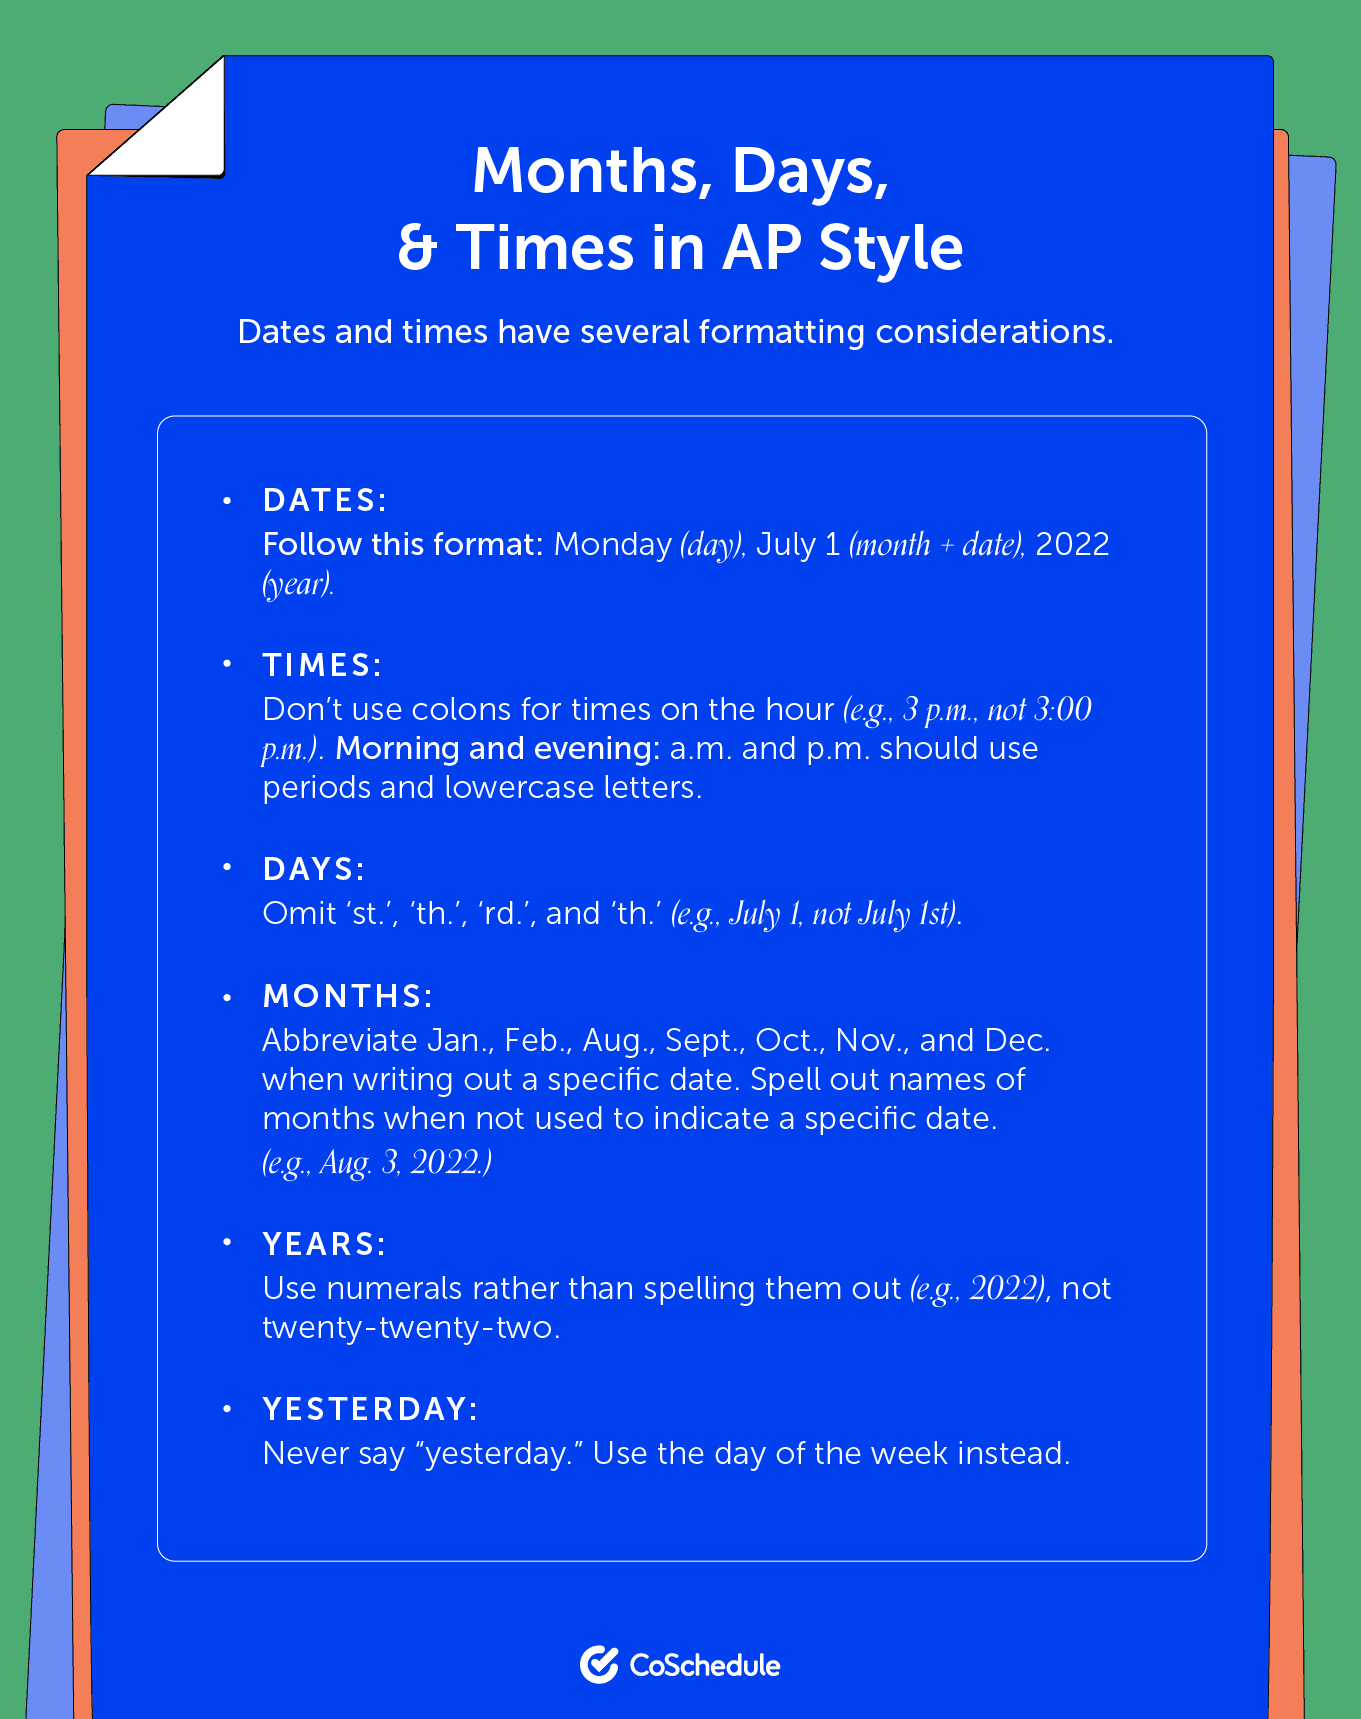 Months, days, and times in AP style